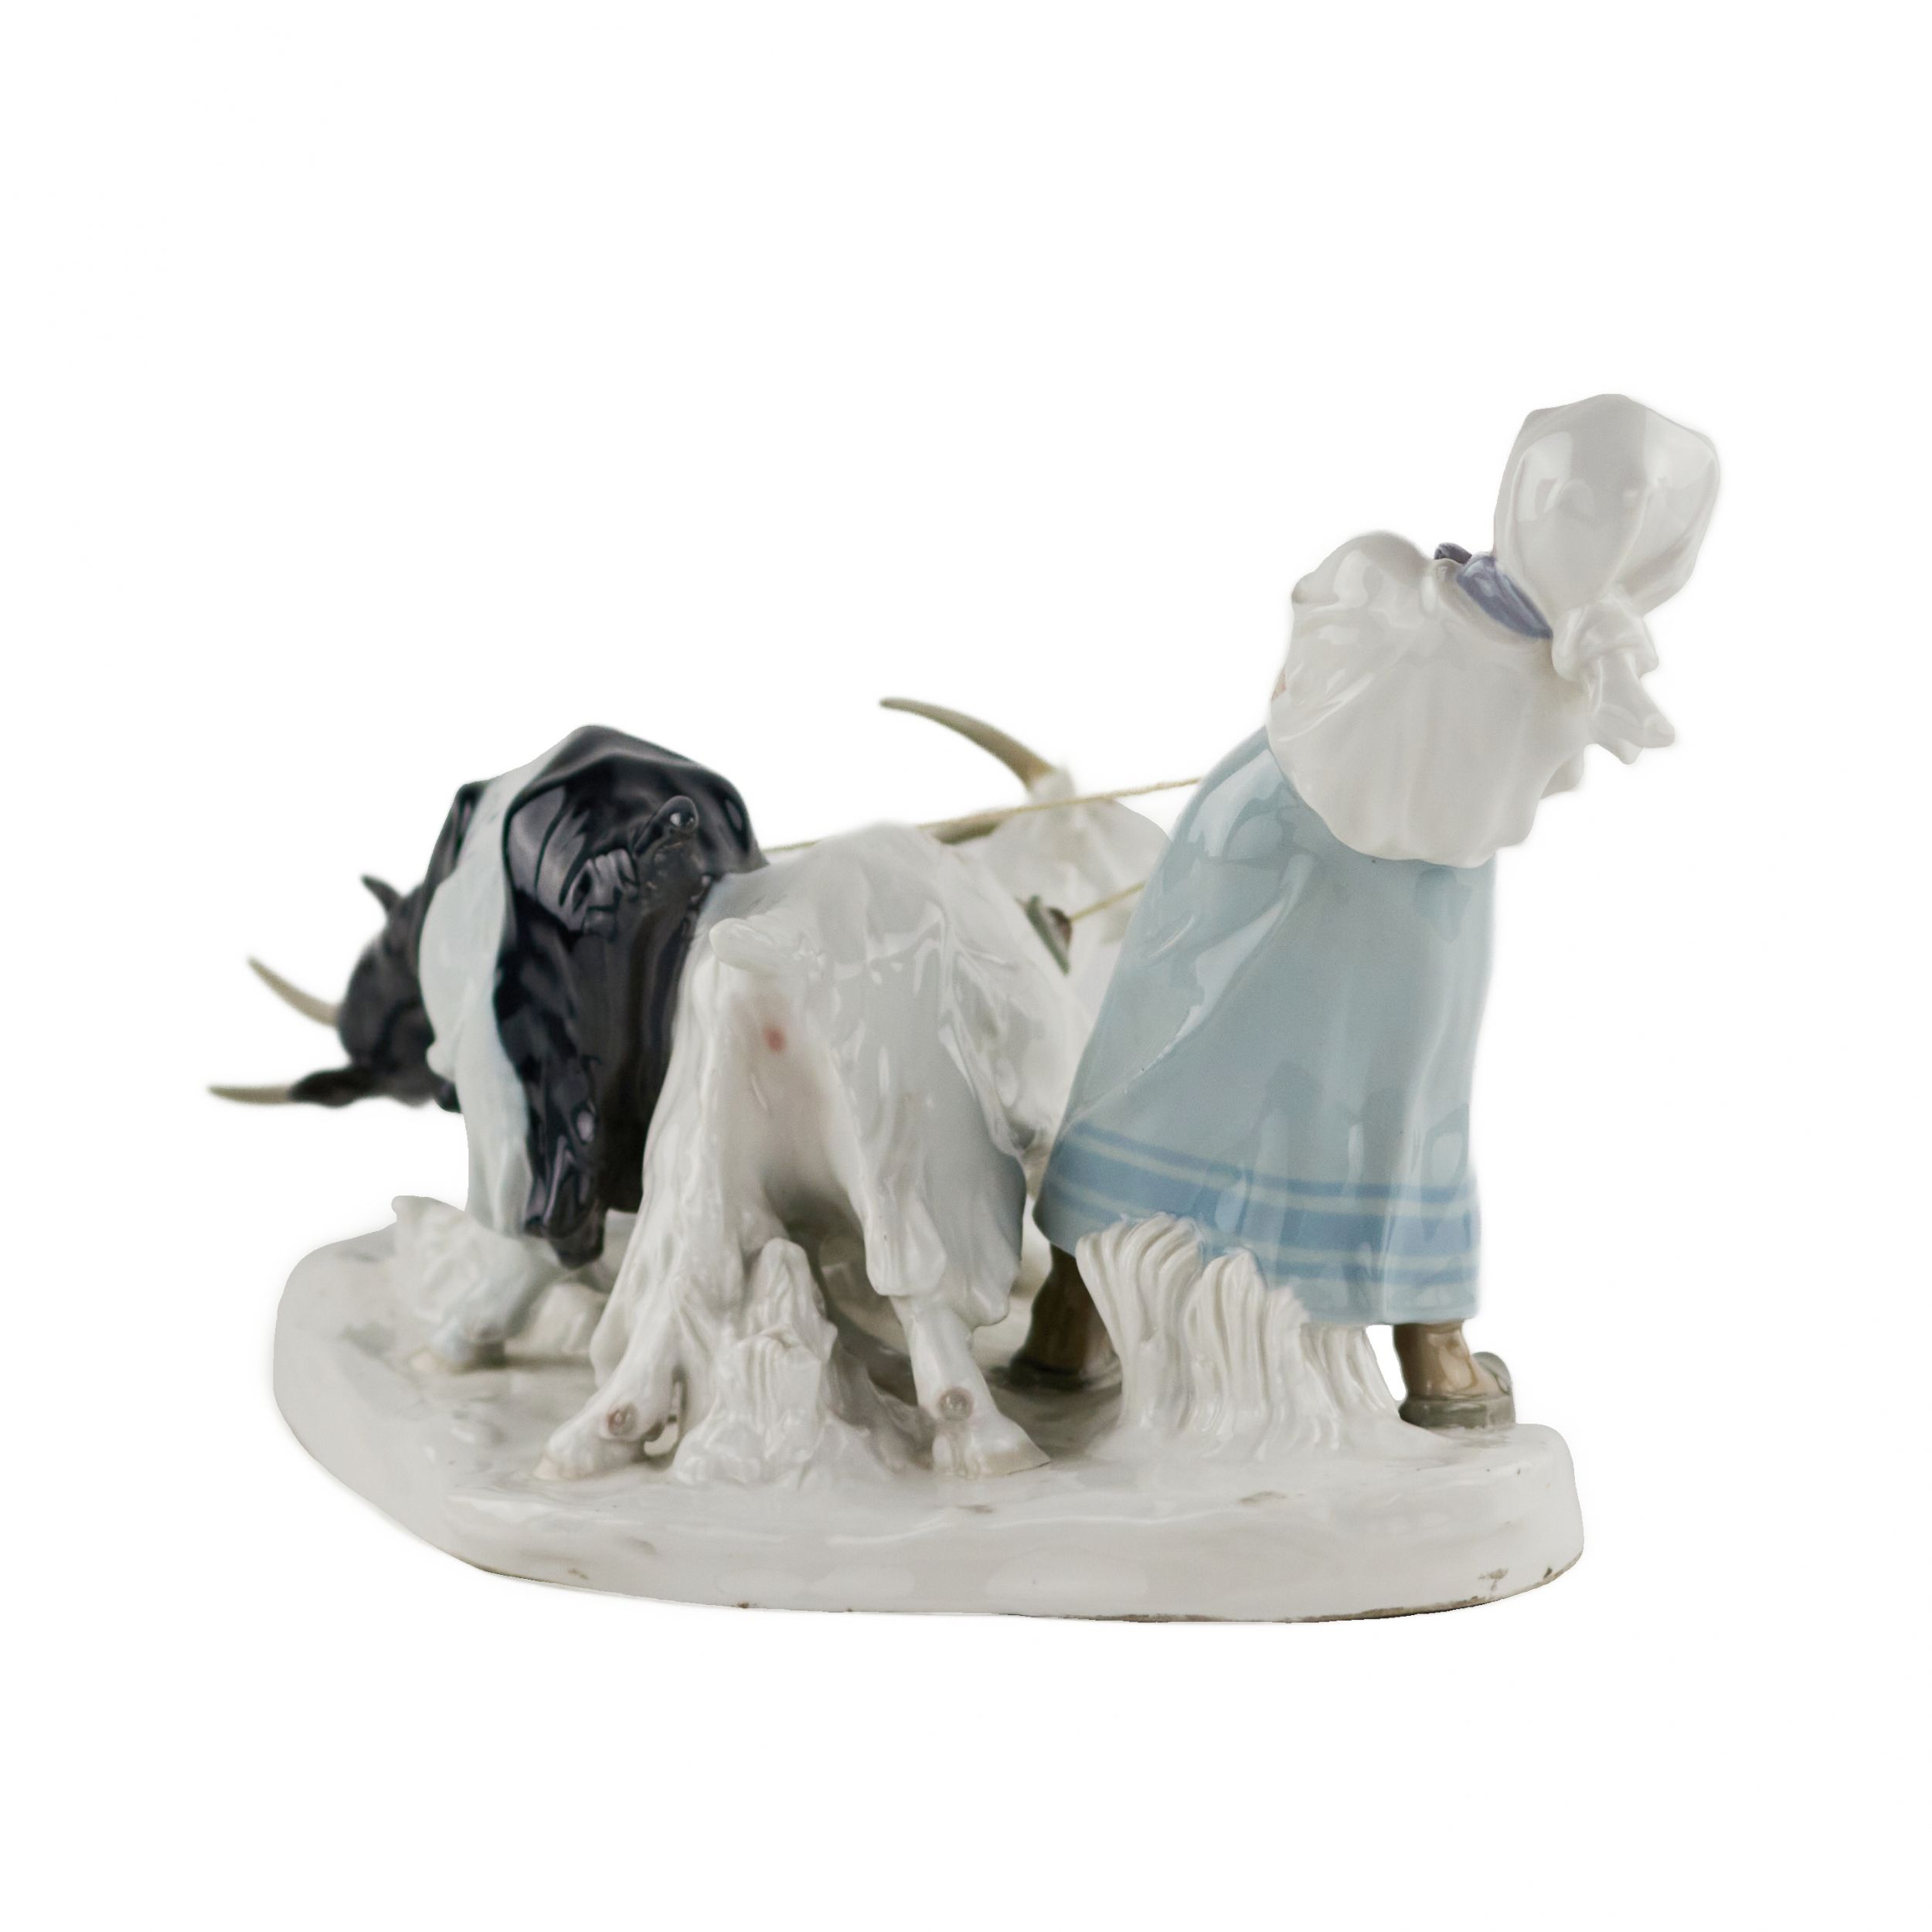 Porcelain composition Shepherdess with goats. Pilz, Otto. Meissen. 1850-1924. - Image 4 of 7